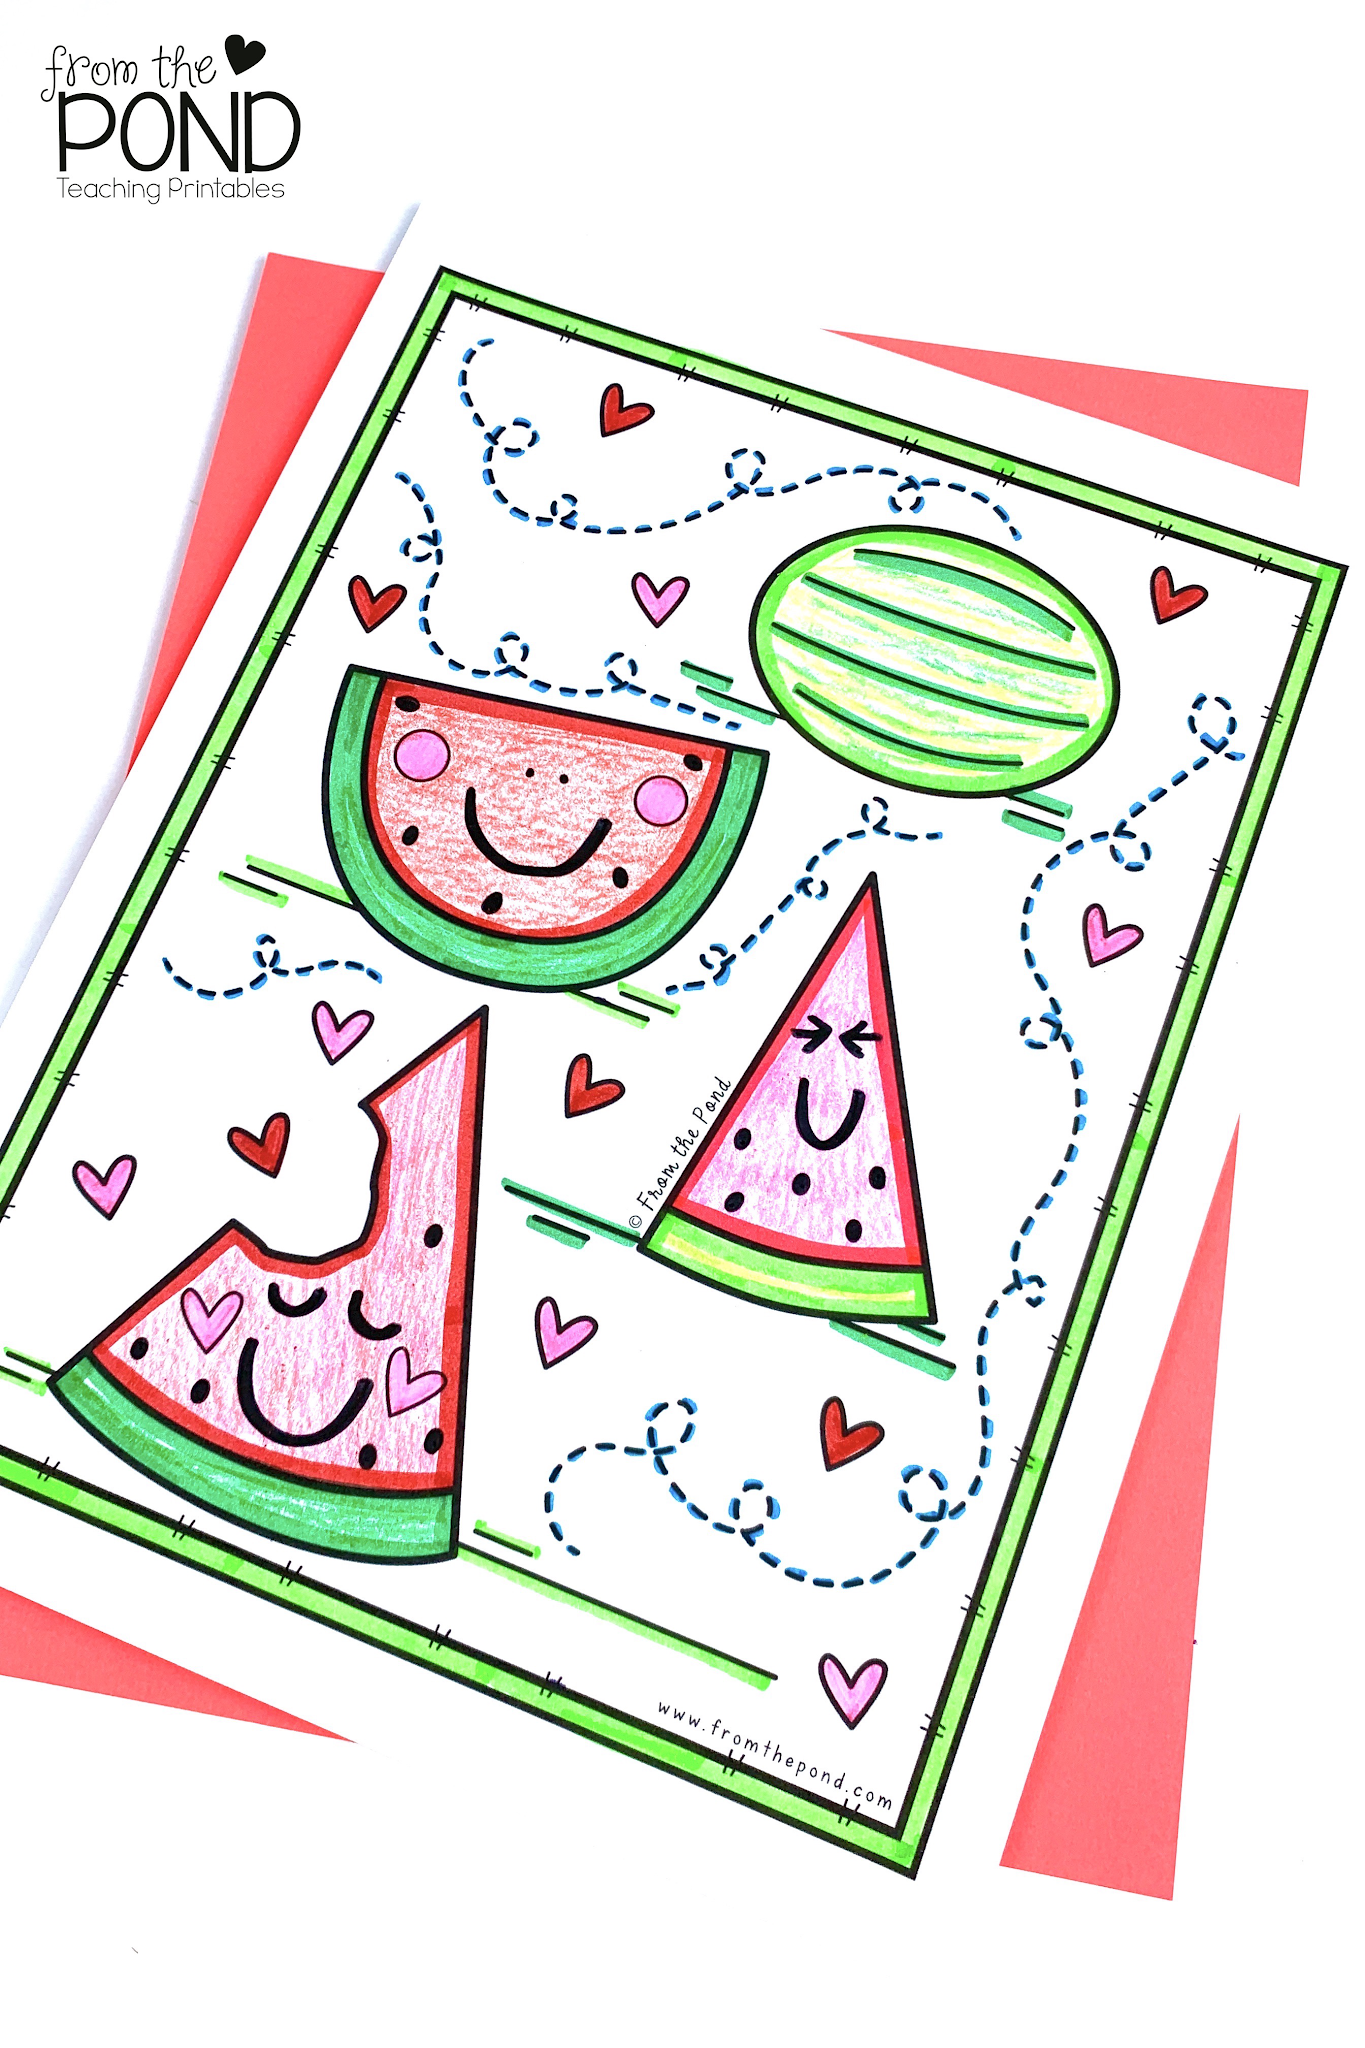 Watermelon coloring page from the pond